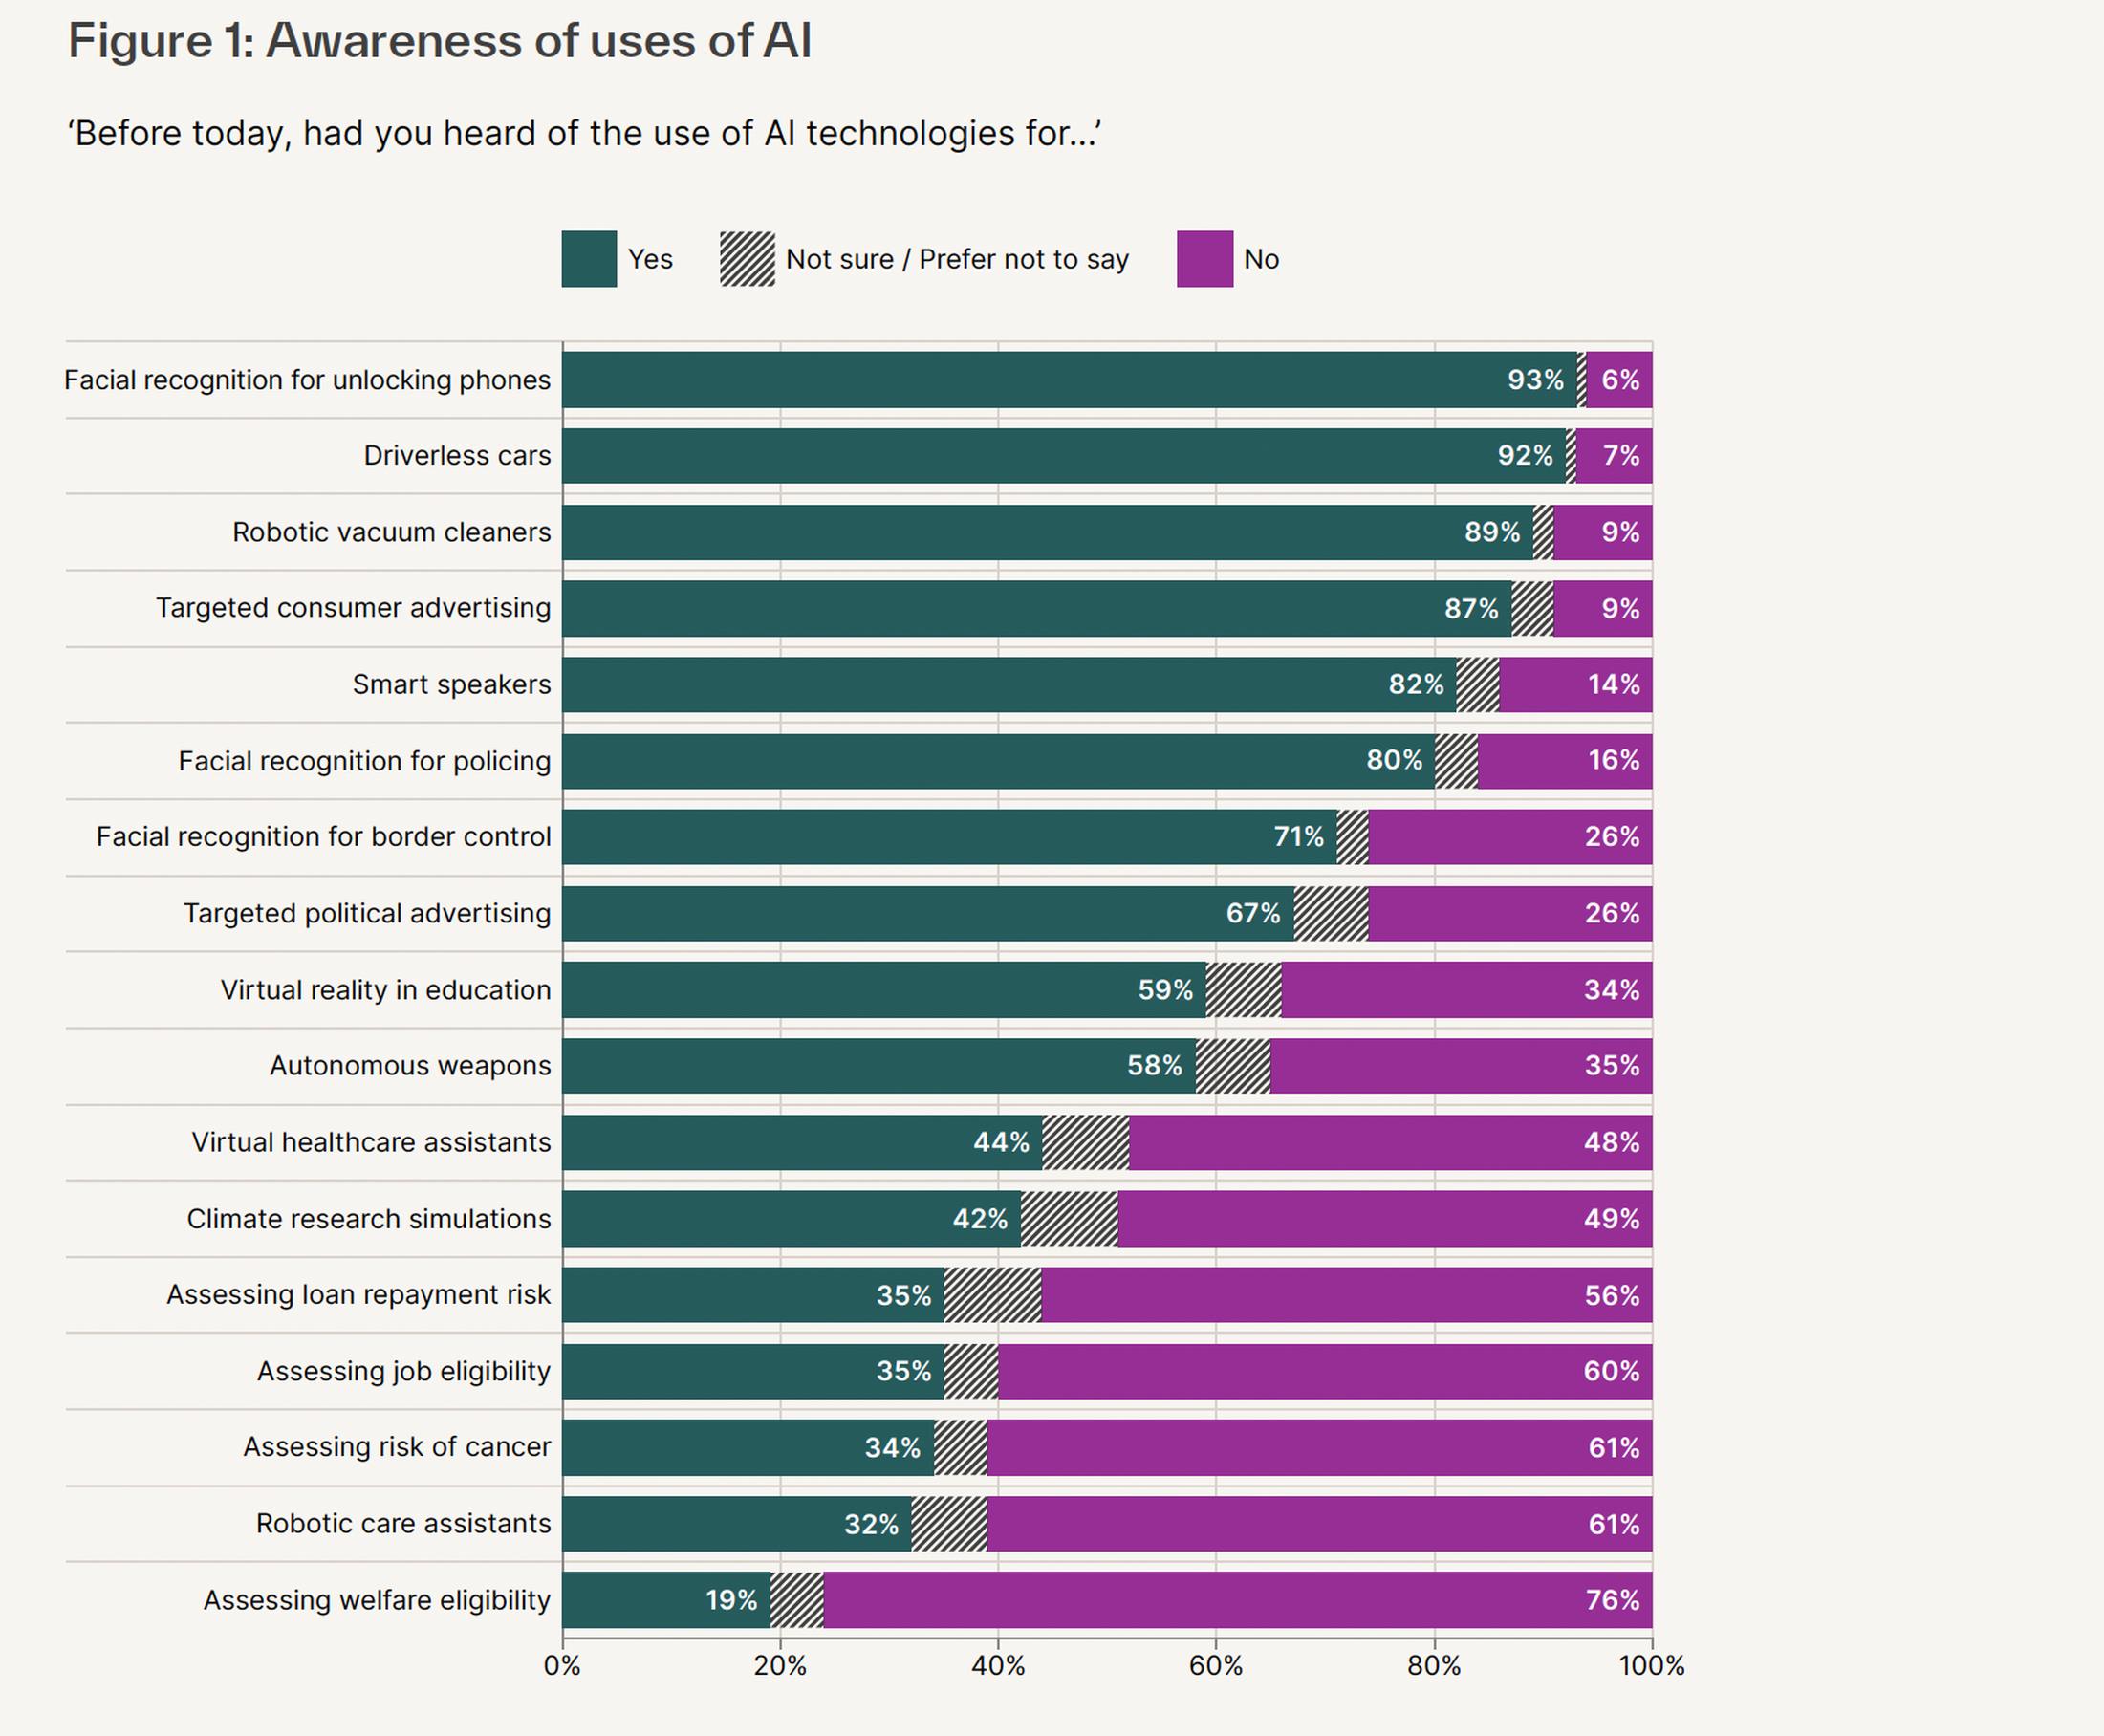 Research by the Ada Lovelace Institute and Alan Turing Institute found that the UK public has broadly positive views of most AI use cases